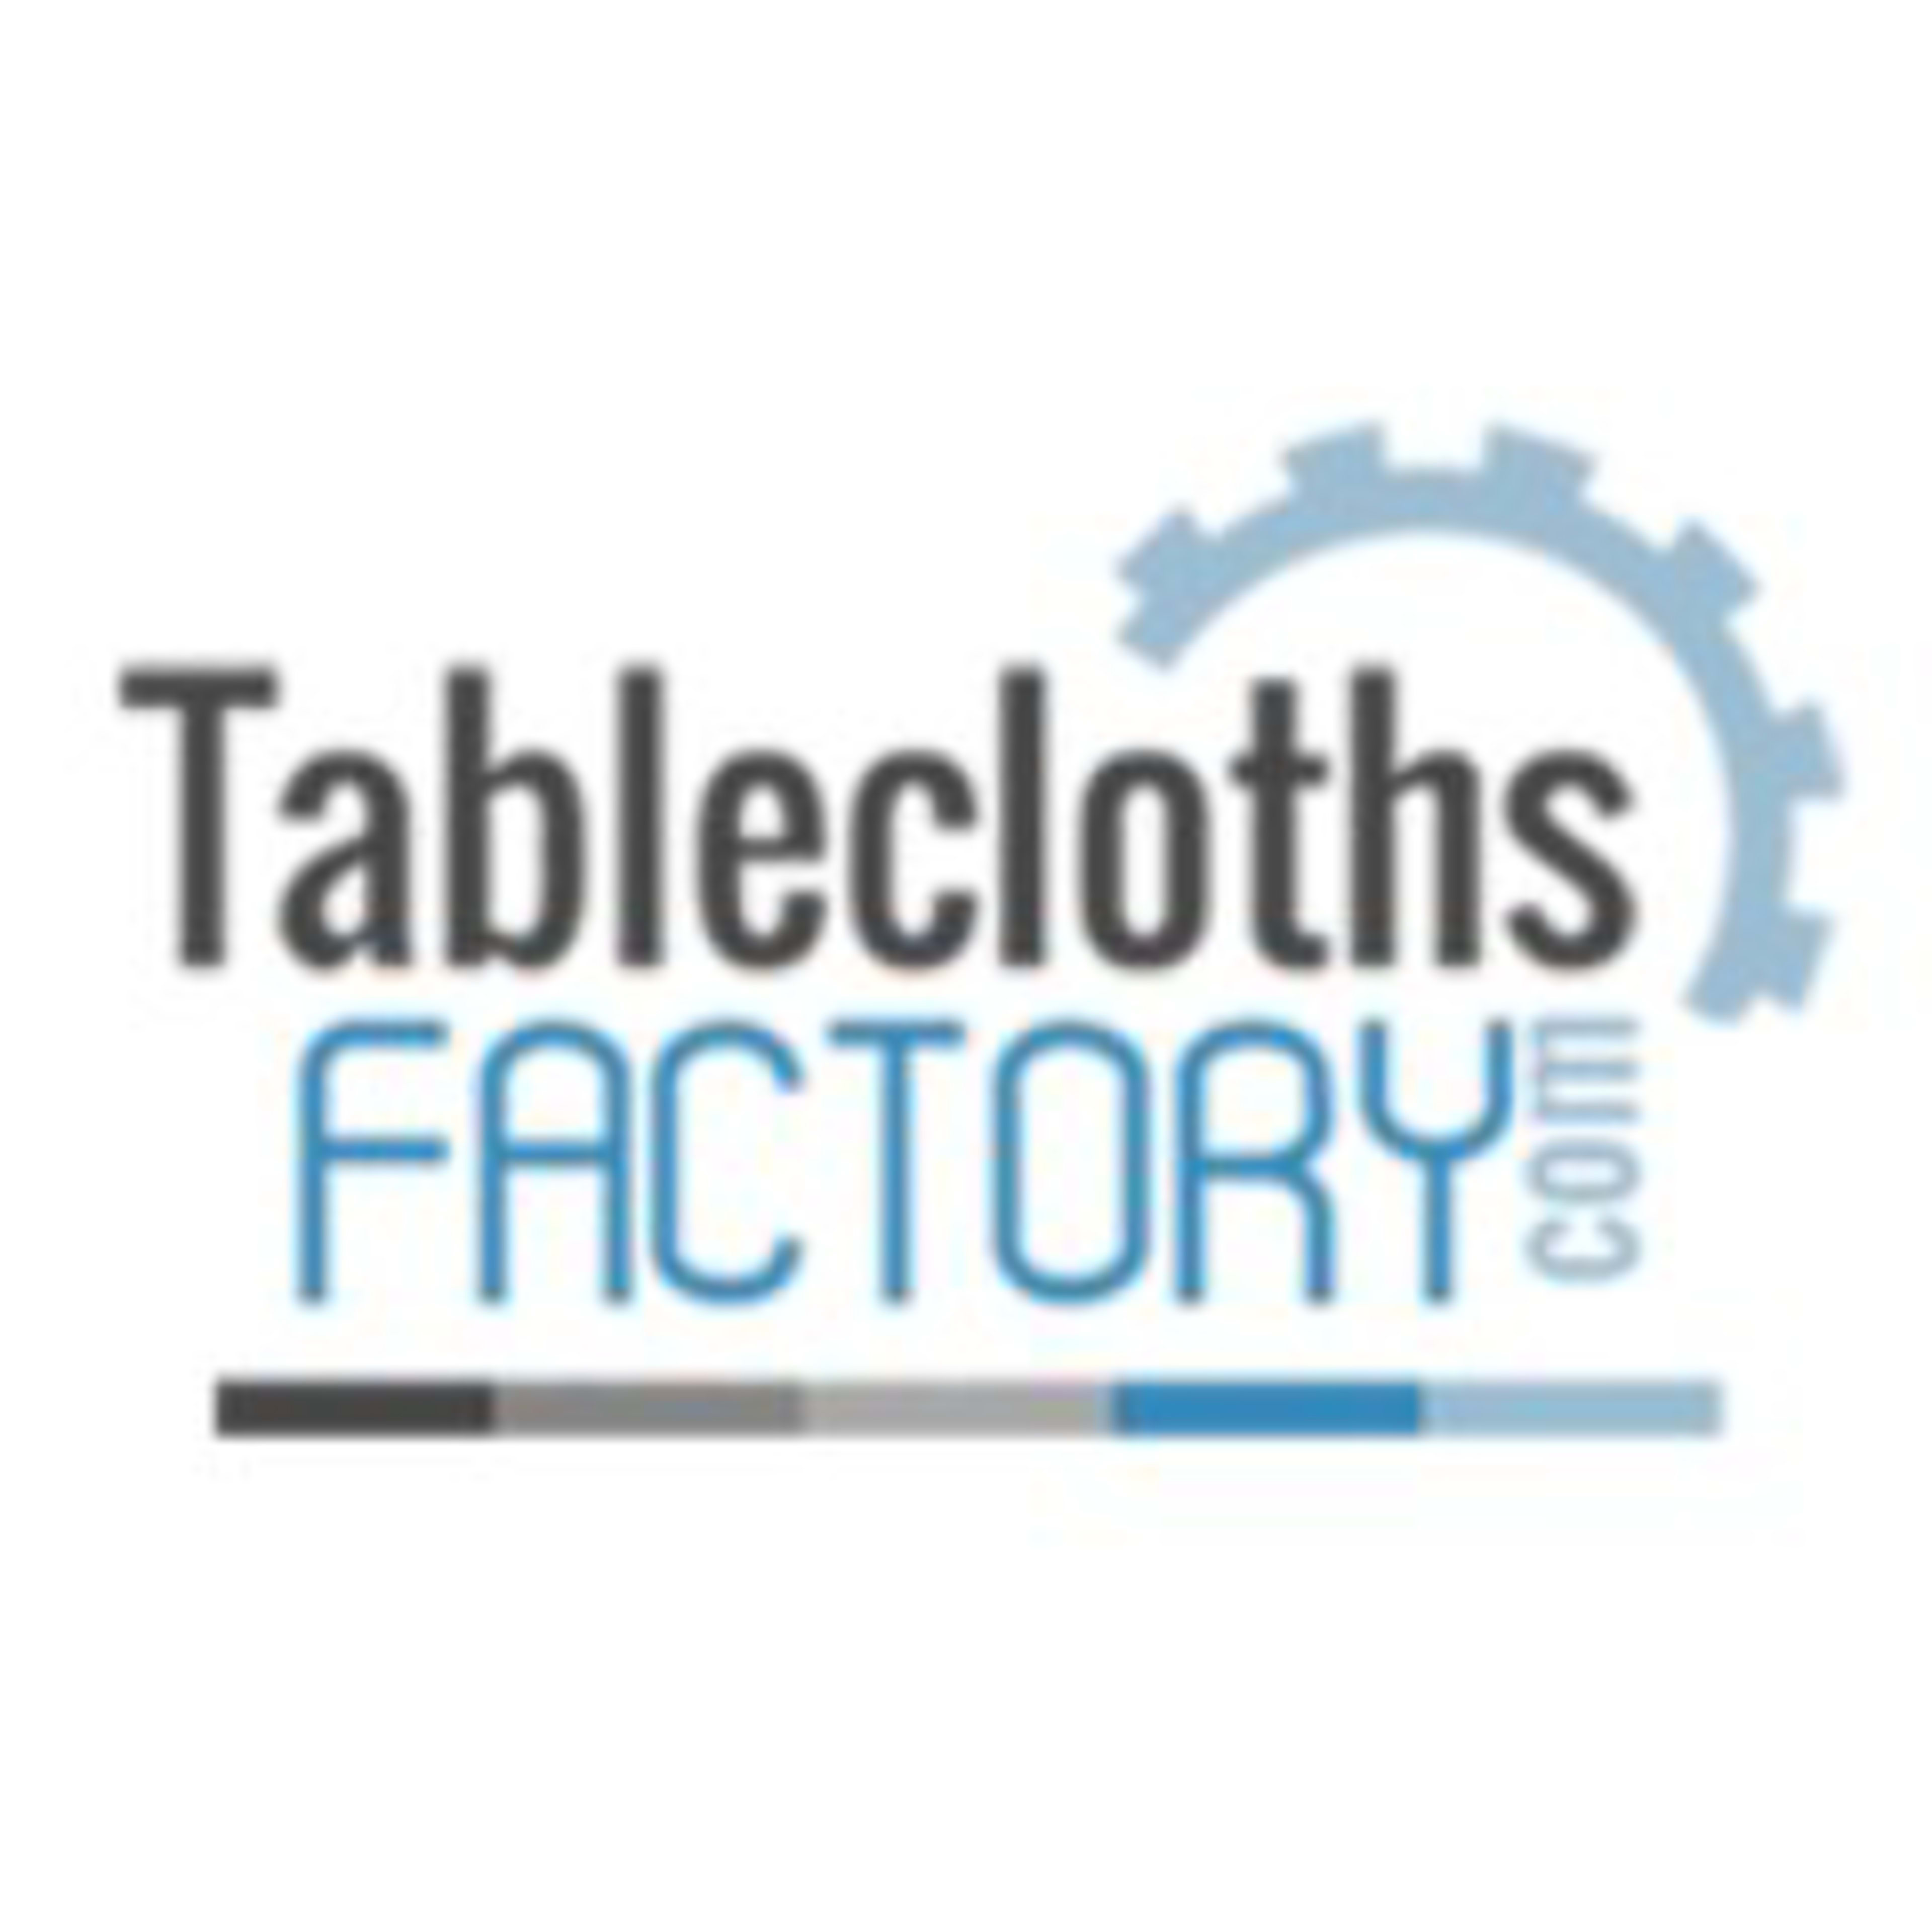 Tablecloths Factory Code